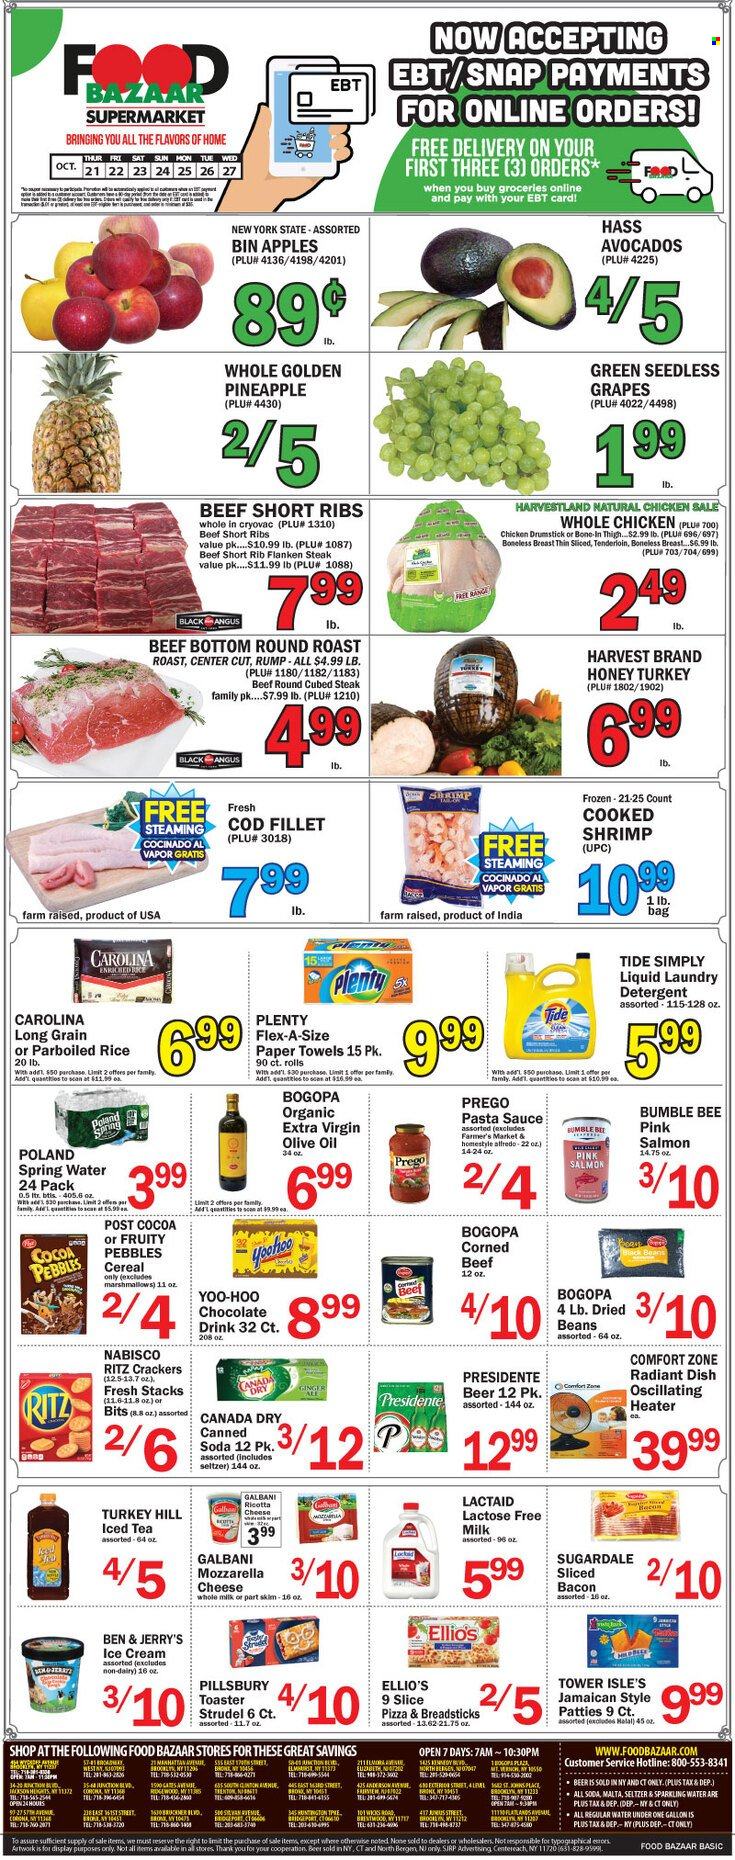 thumbnail - Food Bazaar Flyer - 10/21/2021 - 10/27/2021 - Sales products - seedless grapes, strudel, beans, apples, avocado, grapes, pineapple, cod, salmon, shrimps, pizza, pasta sauce, Bumble Bee, sauce, Pillsbury, Sugardale, bacon, Lactaid, ricotta, Galbani, milk, ice cream, Ben & Jerry's, marshmallows, crackers, RITZ, bread sticks, cereals, Fruity Pebbles, rice, parboiled rice, extra virgin olive oil, olive oil, oil, honey, Canada Dry, ice tea, seltzer water, spring water, soda, sparkling water, chocolate drink, beer, whole chicken, beef meat, beef ribs, steak, round roast. Page 1.